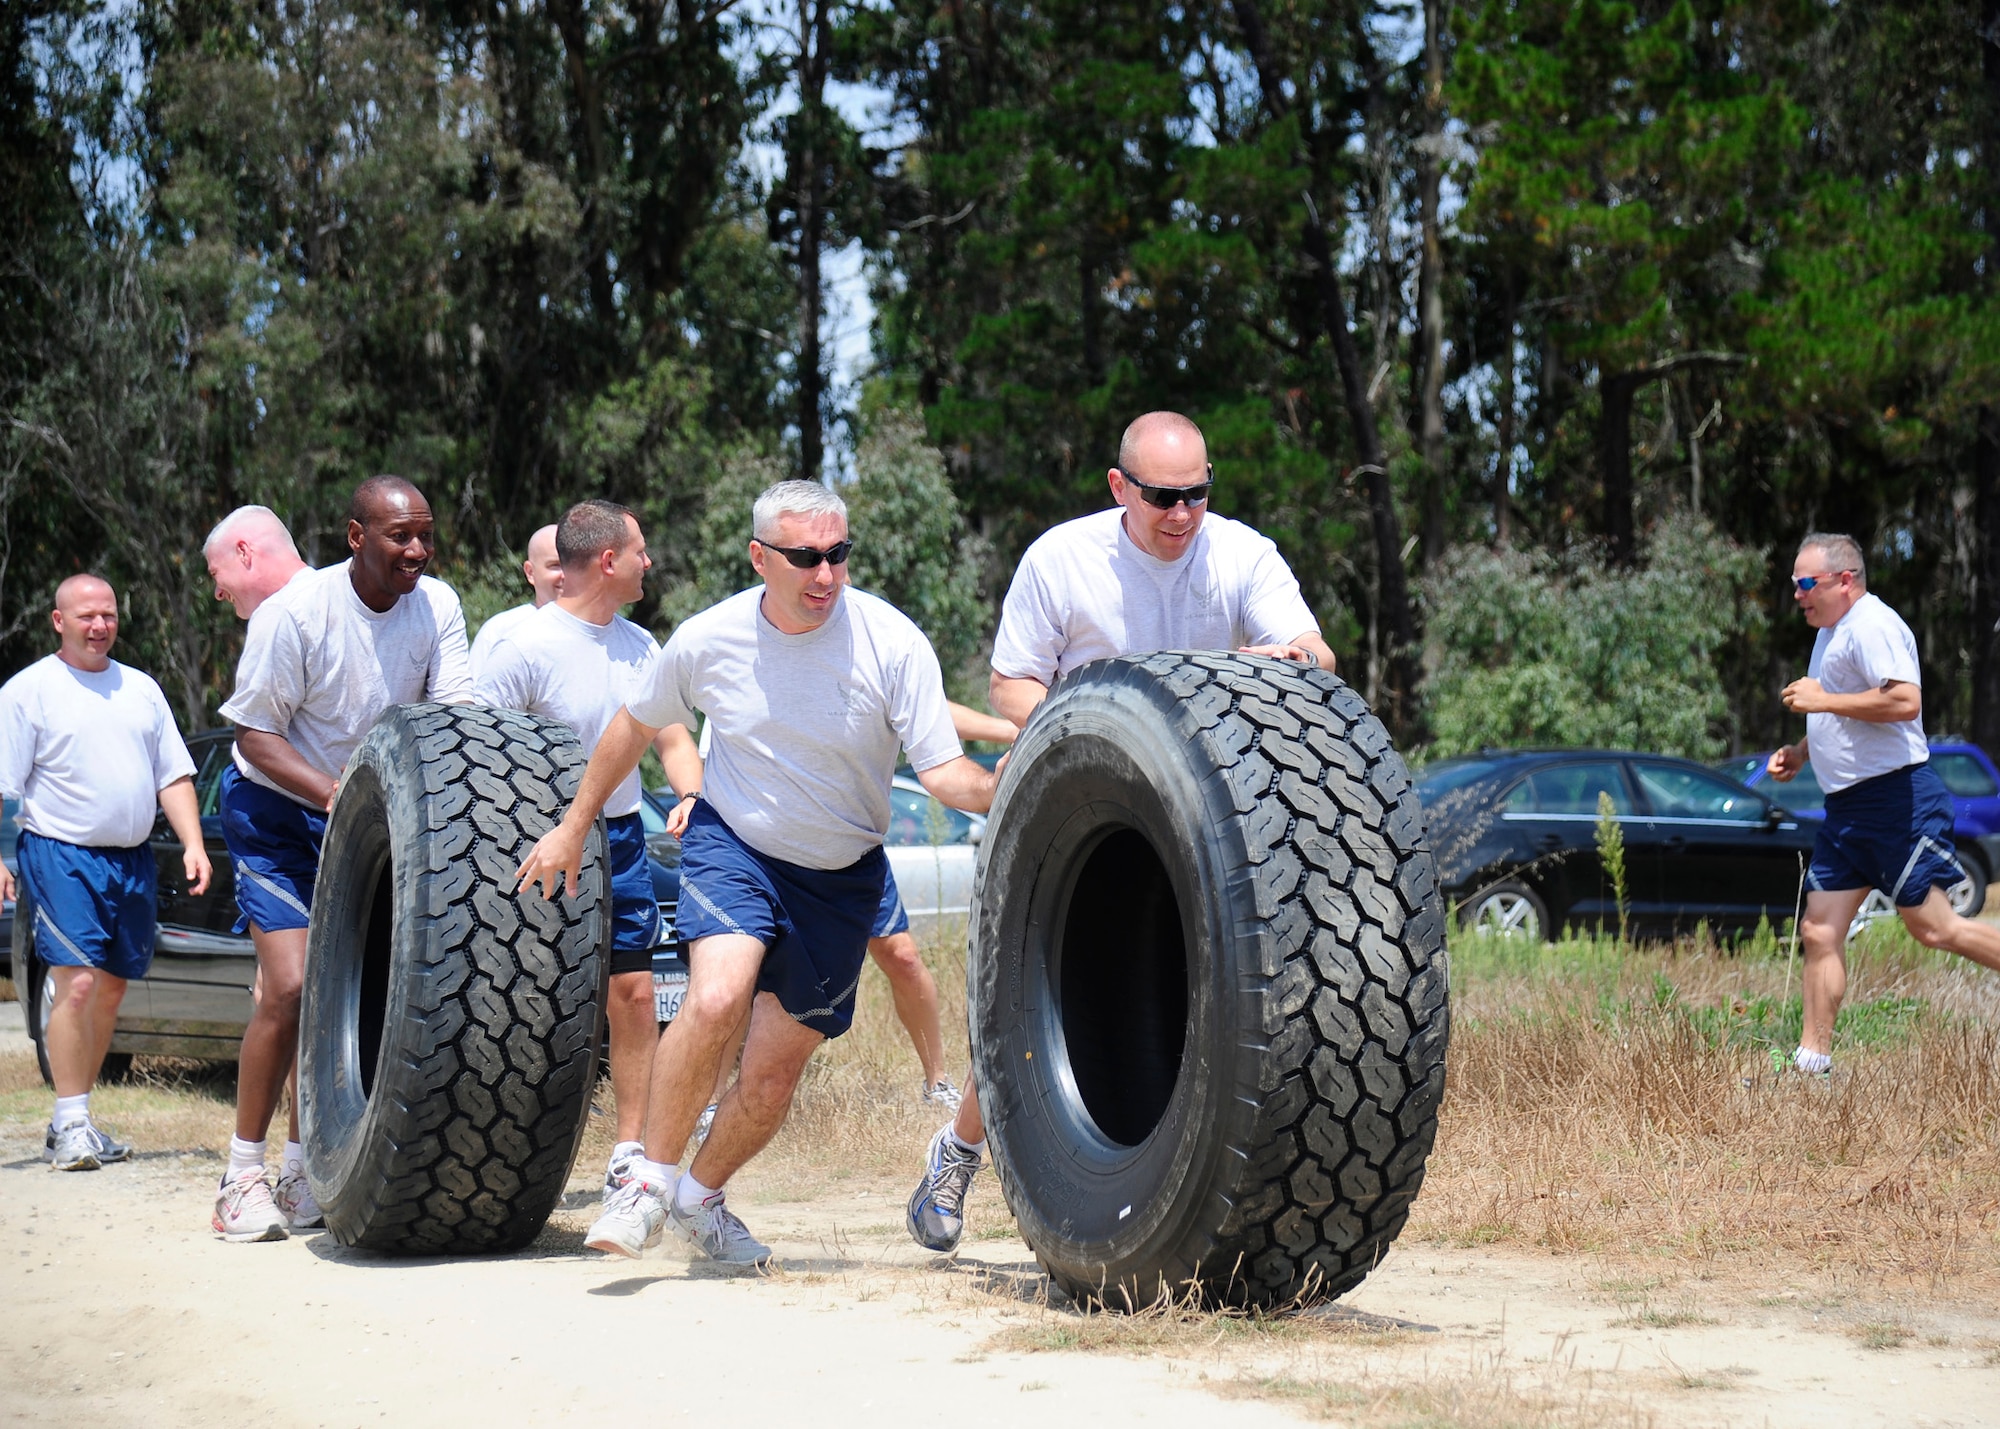 VANDENBERG AIR FORCE BASE, Calif. -- Teams for the Chiefs vs. Eagles relay challenge transition to the tire push portion of the race during sports day at Cocheo Park here Friday, August 17, 2012. Sports day is organized by the 30th Force Support Squadron Fitness Center staff and offers squadrons and organizational teams a chance to compete in a variety of sporting events throughout the day. The 30th Civil Engineer Squadron finished the competition with the first place championship. (U.S. Air Force photo/Michael Peterson)